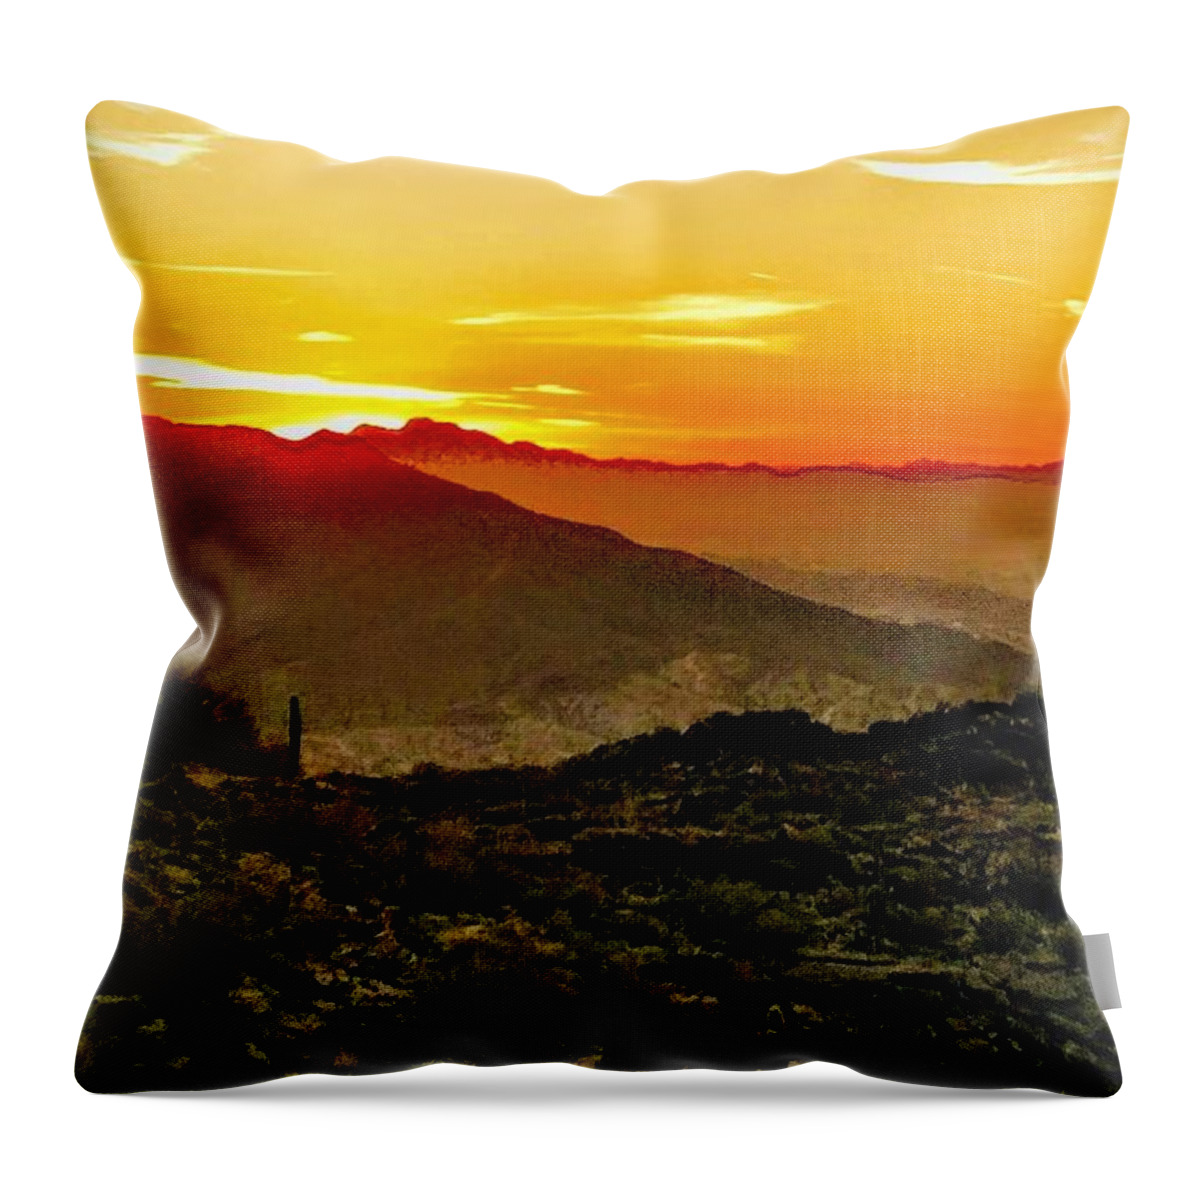  Throw Pillow featuring the photograph Arizona Sunset by Brad Nellis